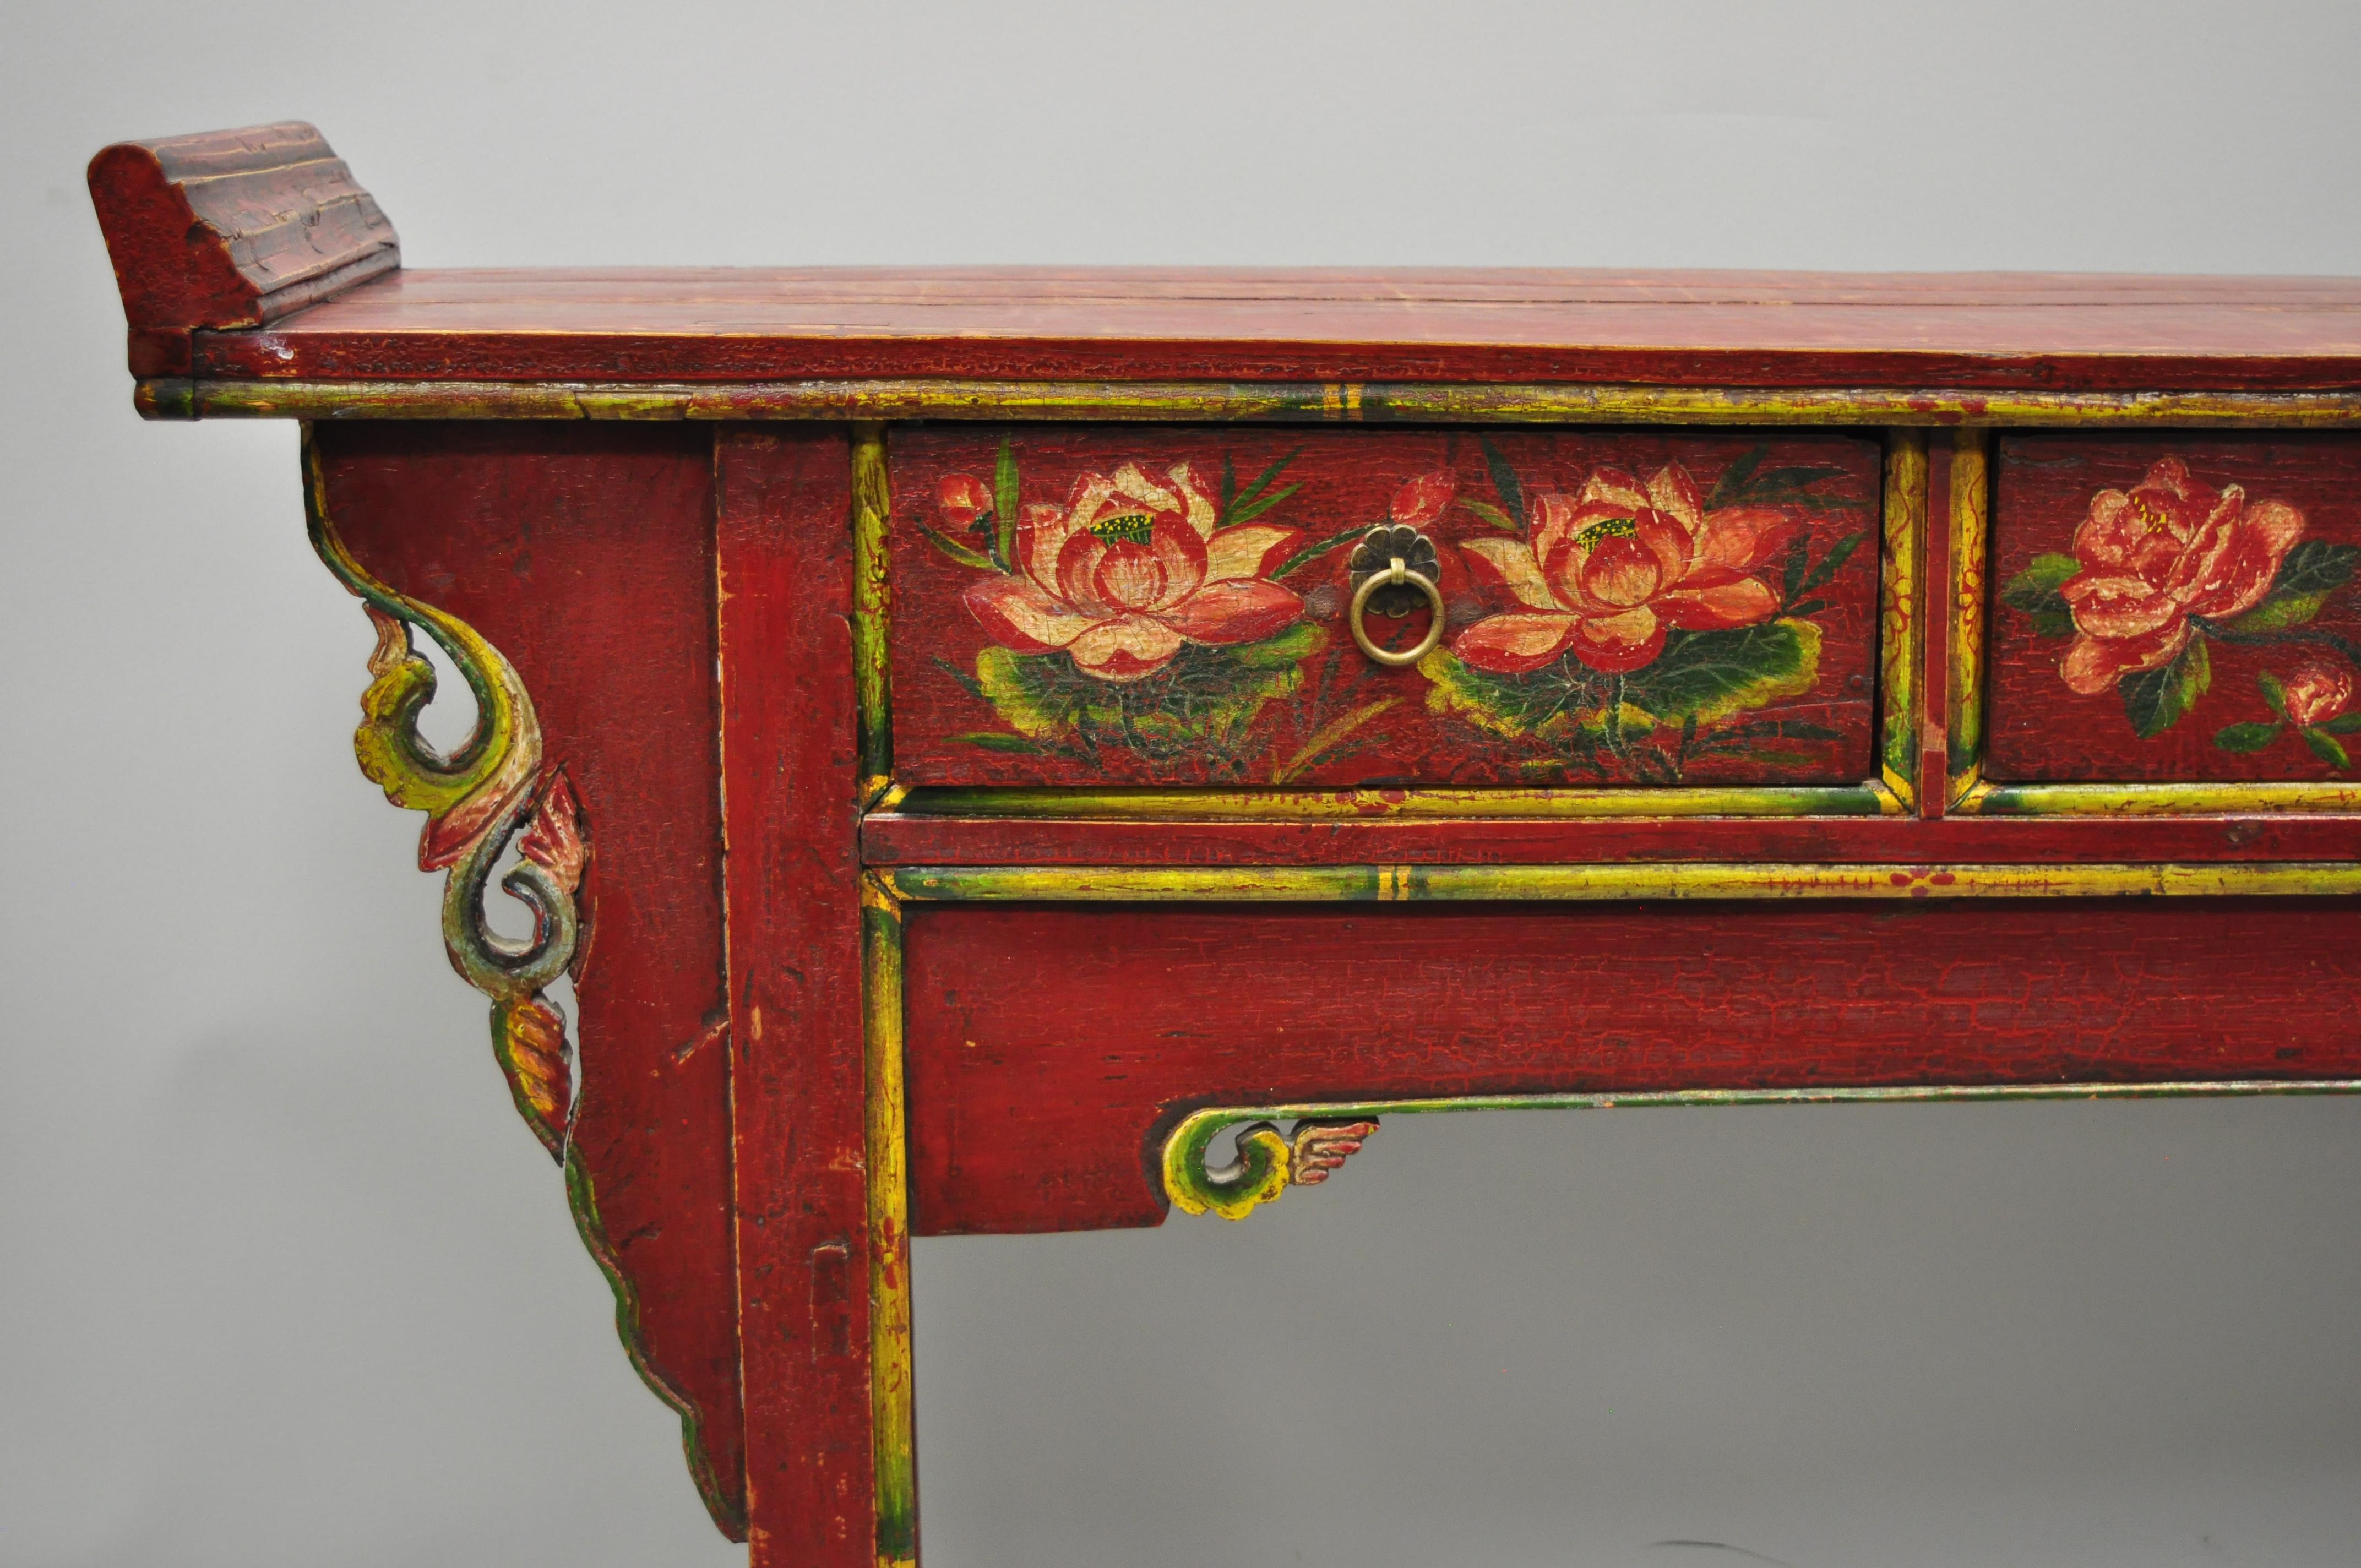 Mid-20th century red and green distress painted Mongolian buffet. Item features charming hand- painted floral design in reds, green and yellow, solid wood construction, and three dovetailed drawers, circa-mid 20th century. Measurements: Overall 37